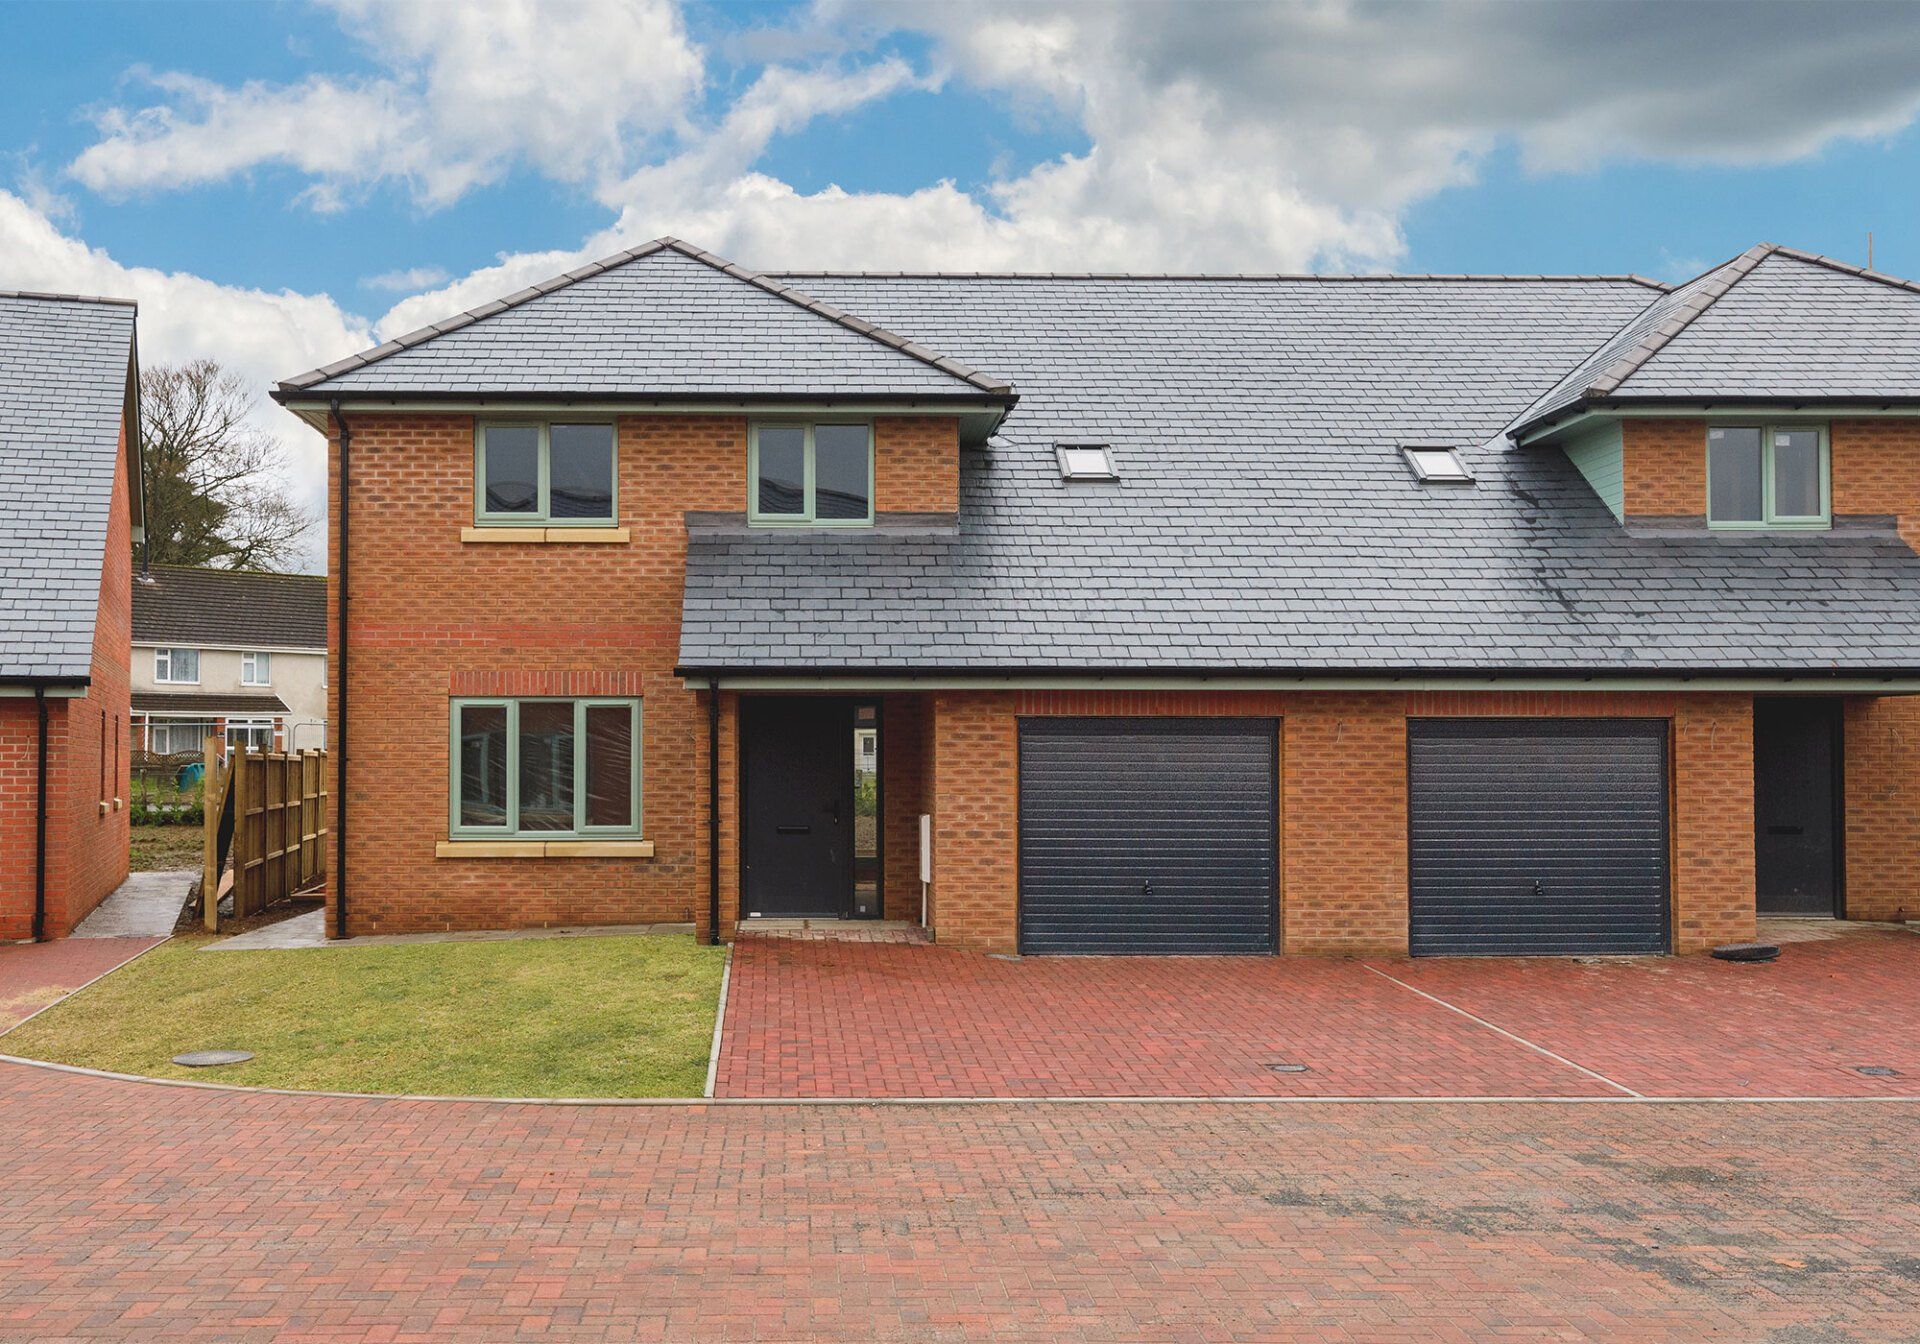 Montgomery is a 3-bed semi-detached property with integrated garage.